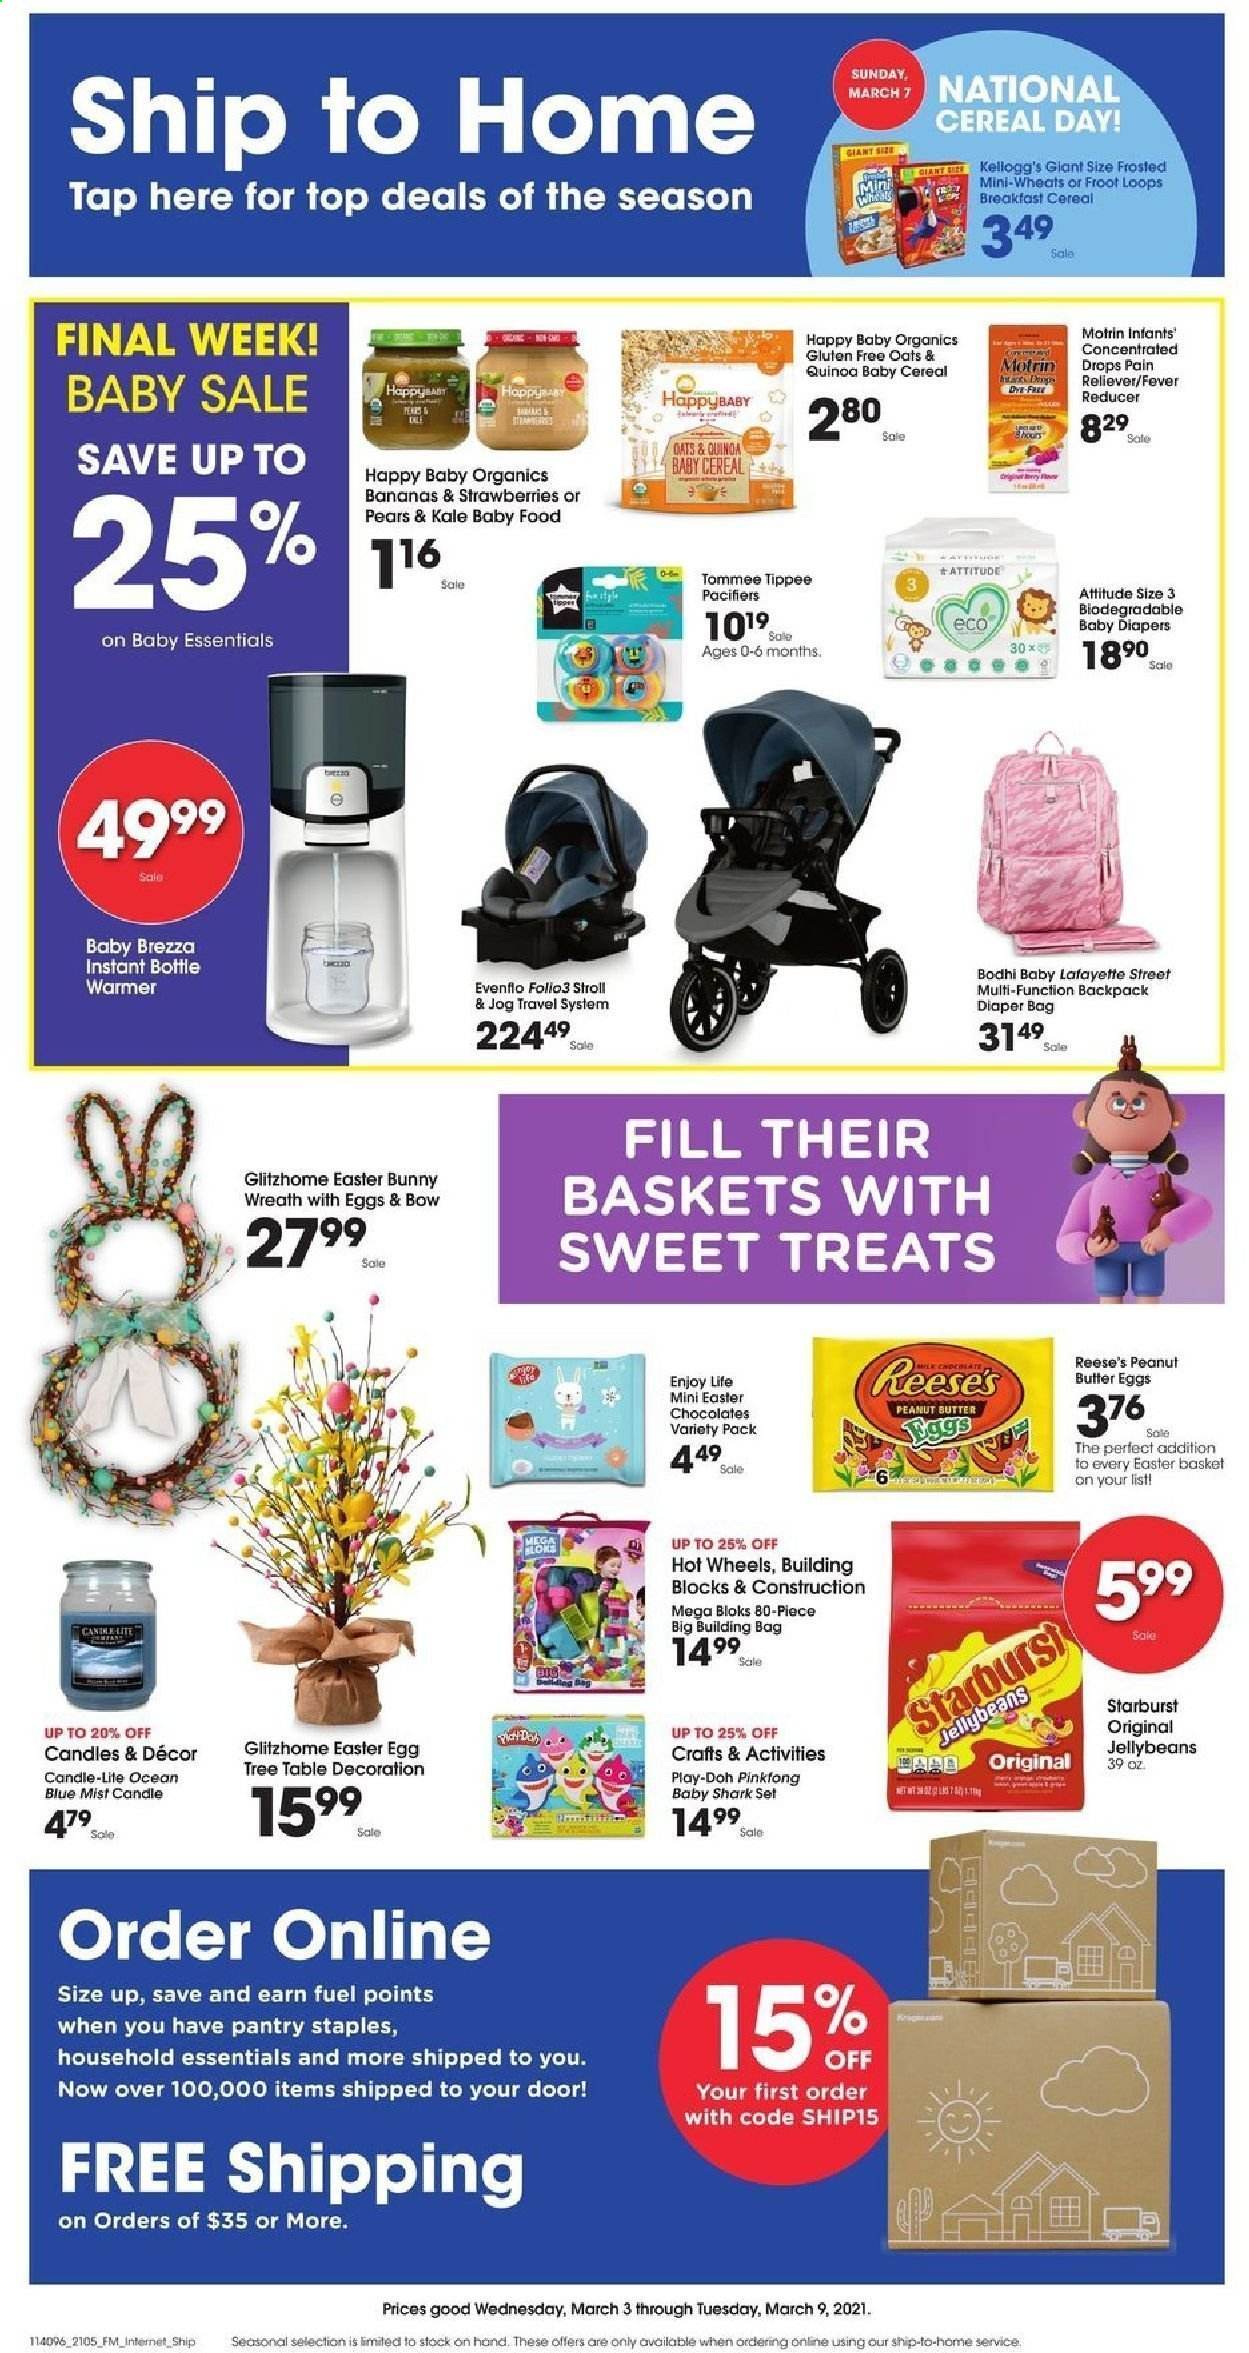 thumbnail - Kroger Flyer - 03/03/2021 - 03/09/2021 - Sales products - table, wreath, easter egg, bananas, pears, eggs, Reese's, strawberries, chocolate, Starburst, oats, cereals, peanut butter, basket, candle, backpack, bag, building blocks, Mega Bloks, Play-doh, Hot Wheels, Motrin. Page 1.